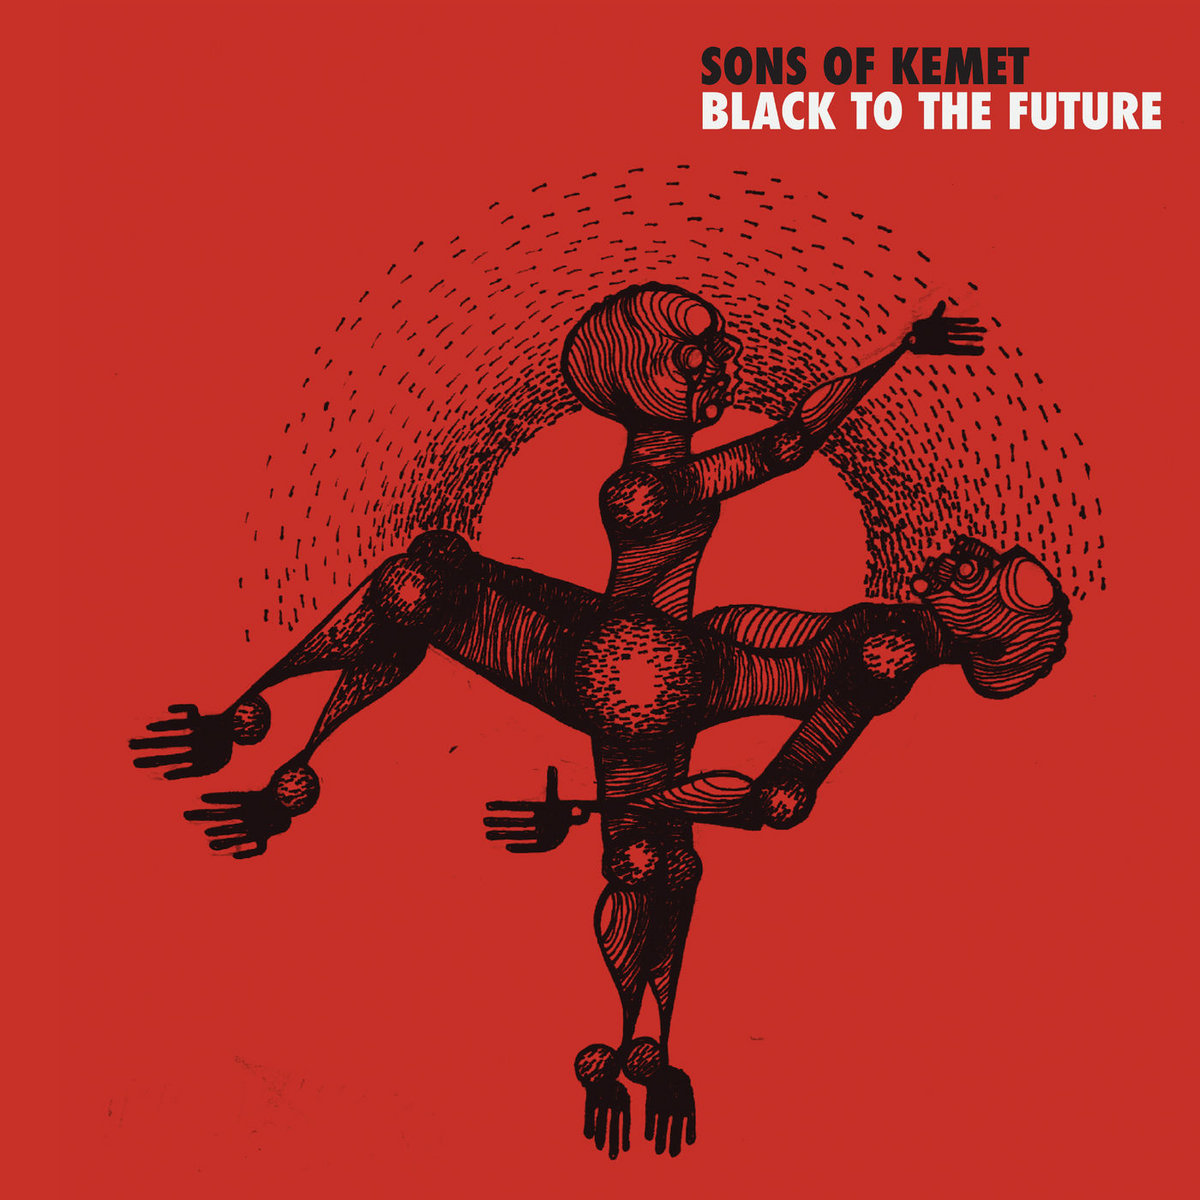 Sons of Kemet Black to the Future